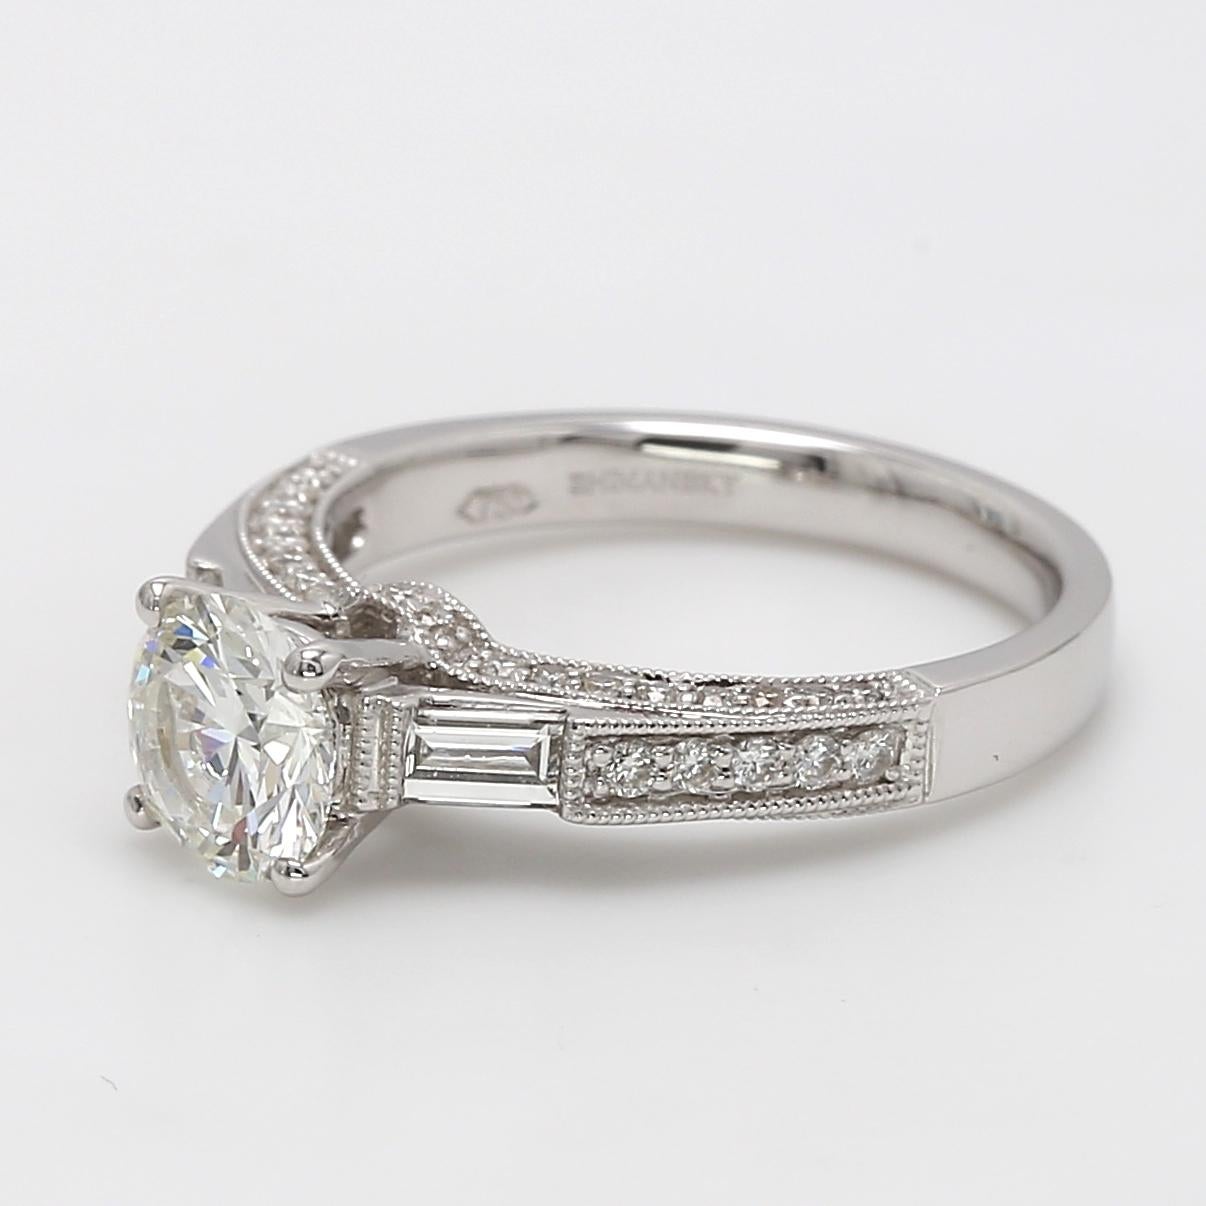 Stunning handcrafted 18 Karat White Gold Engagement Ring.
Round Brilliant Cut White diamond 1.1078 ct  I color and VS1 clarity, flanked by Baguette cut diamonds totaling 0.27ct G-H color and VVS1-VVS2 clarity and Round Brilliant Cut 0.36 ct G-H